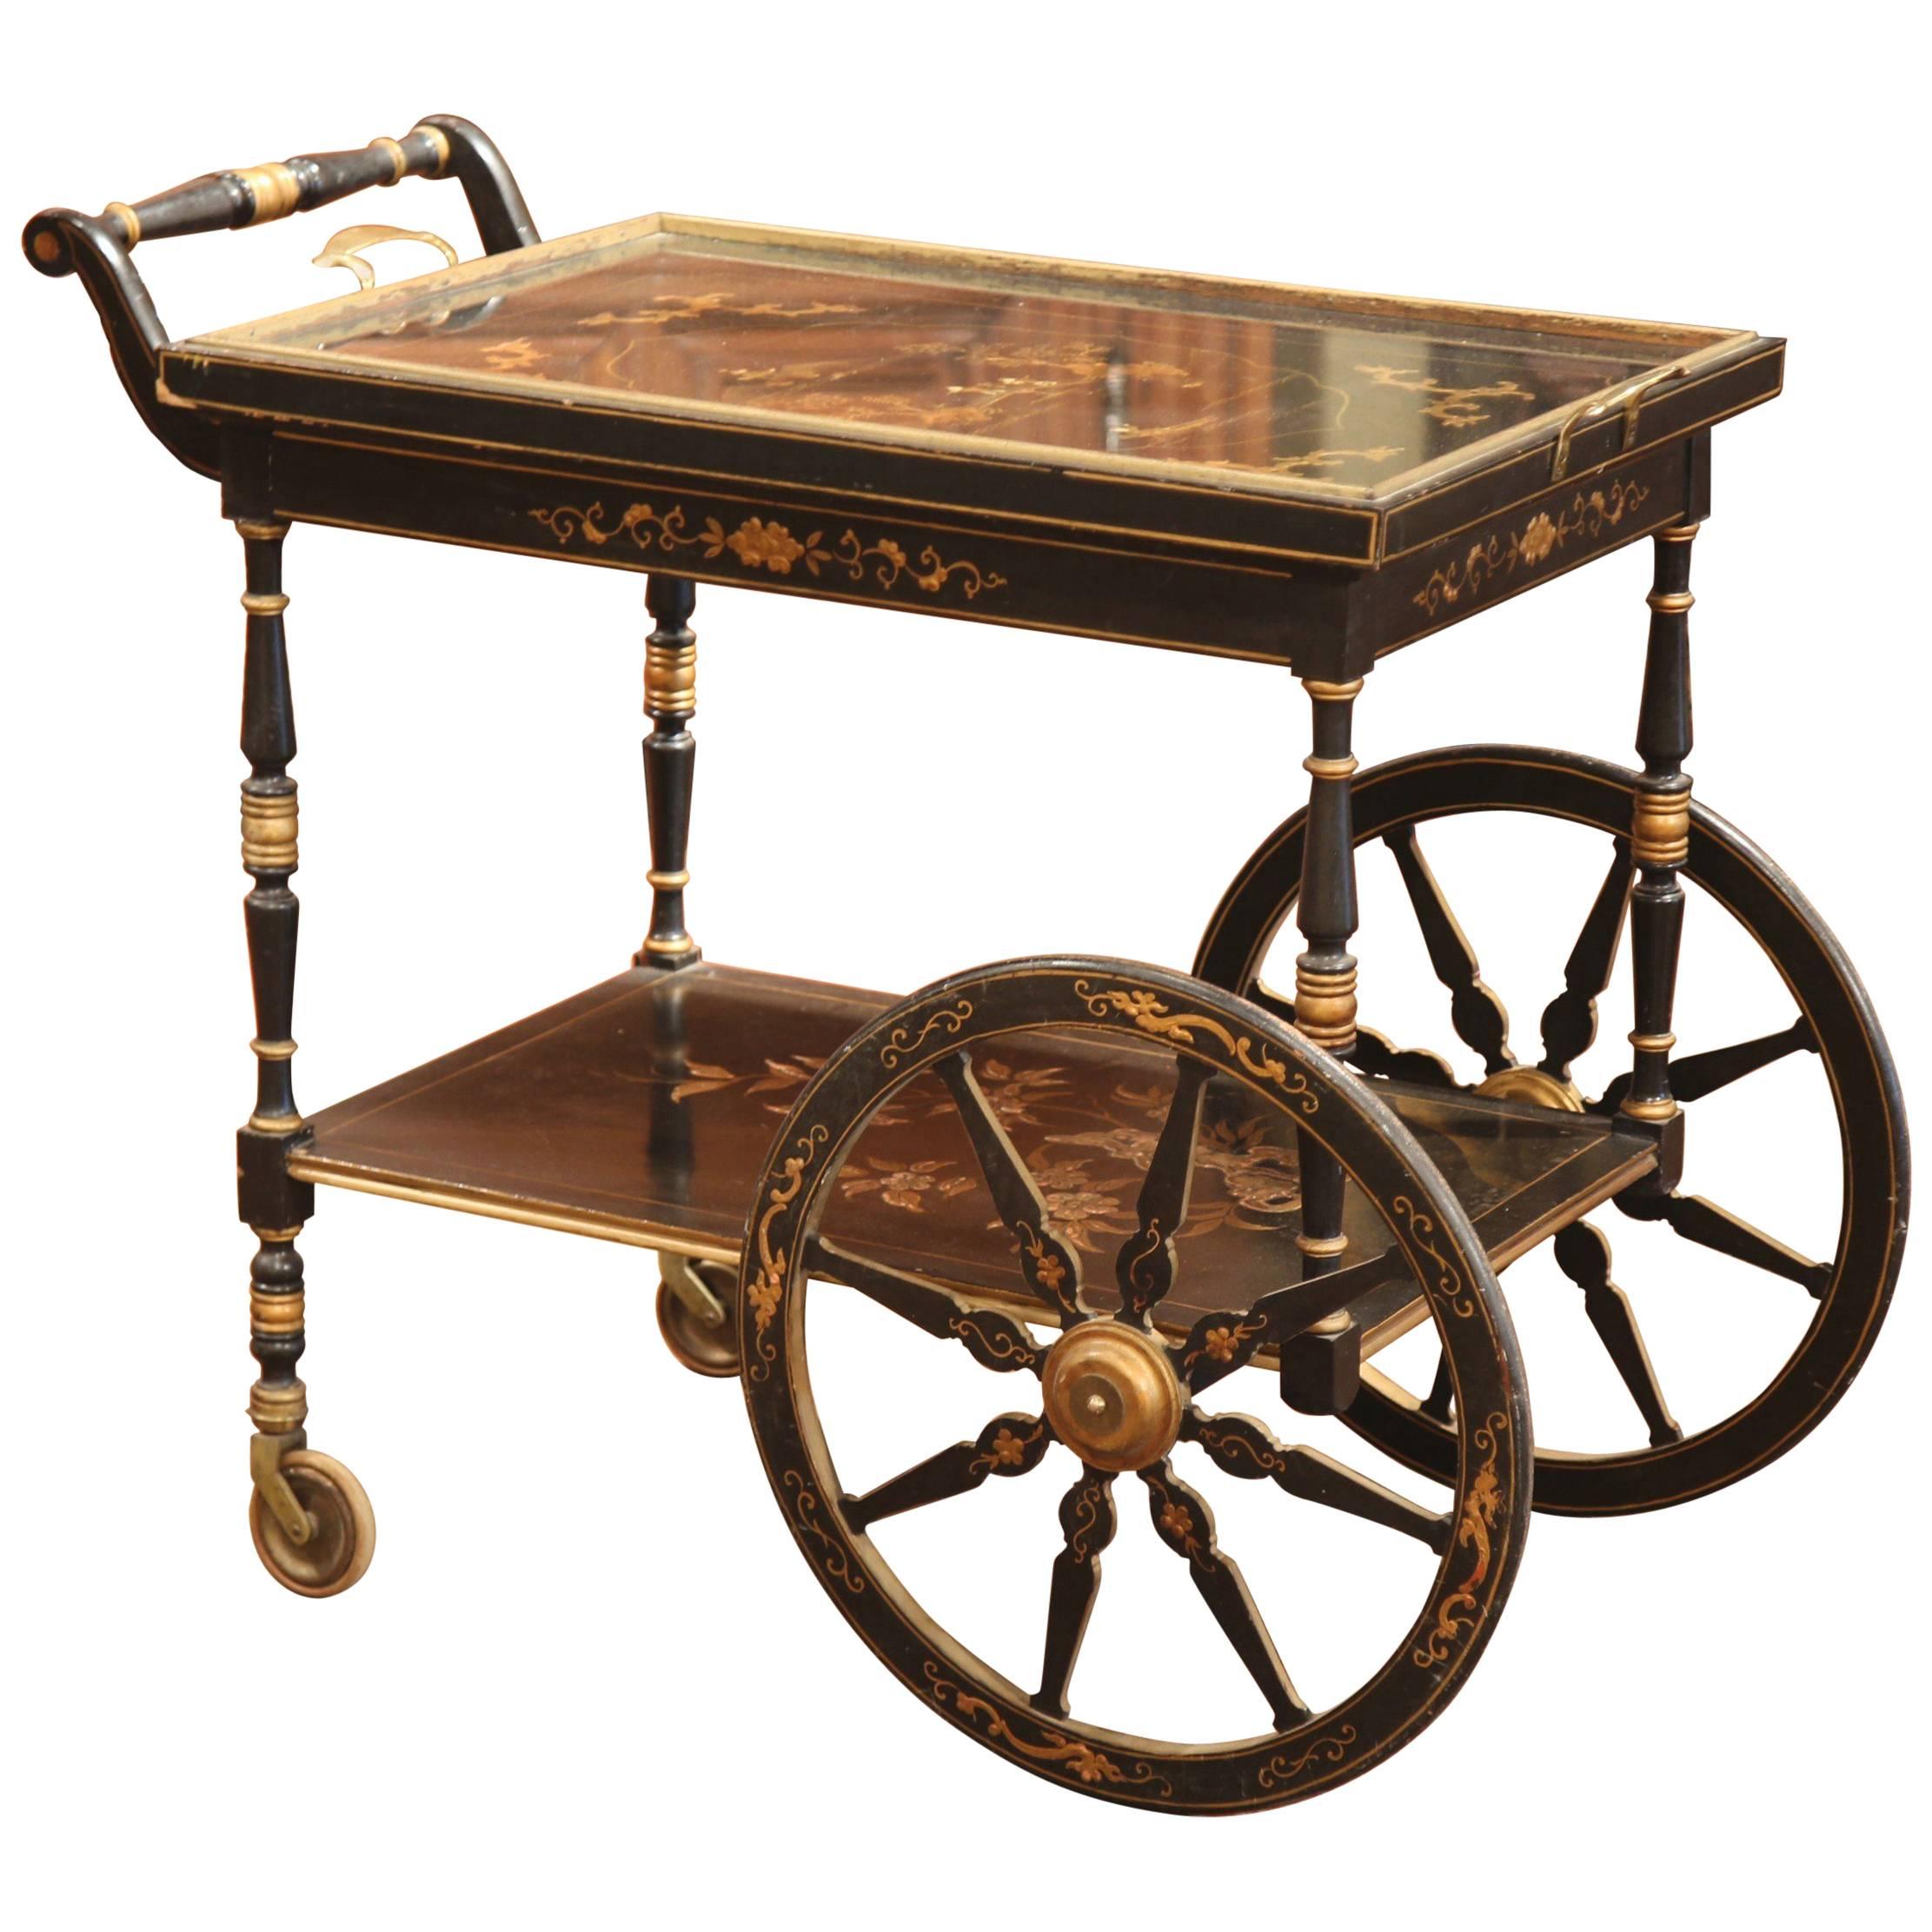 Early 20th Century French Hand-Painted Bar Cart with Chinoiserie Motifs